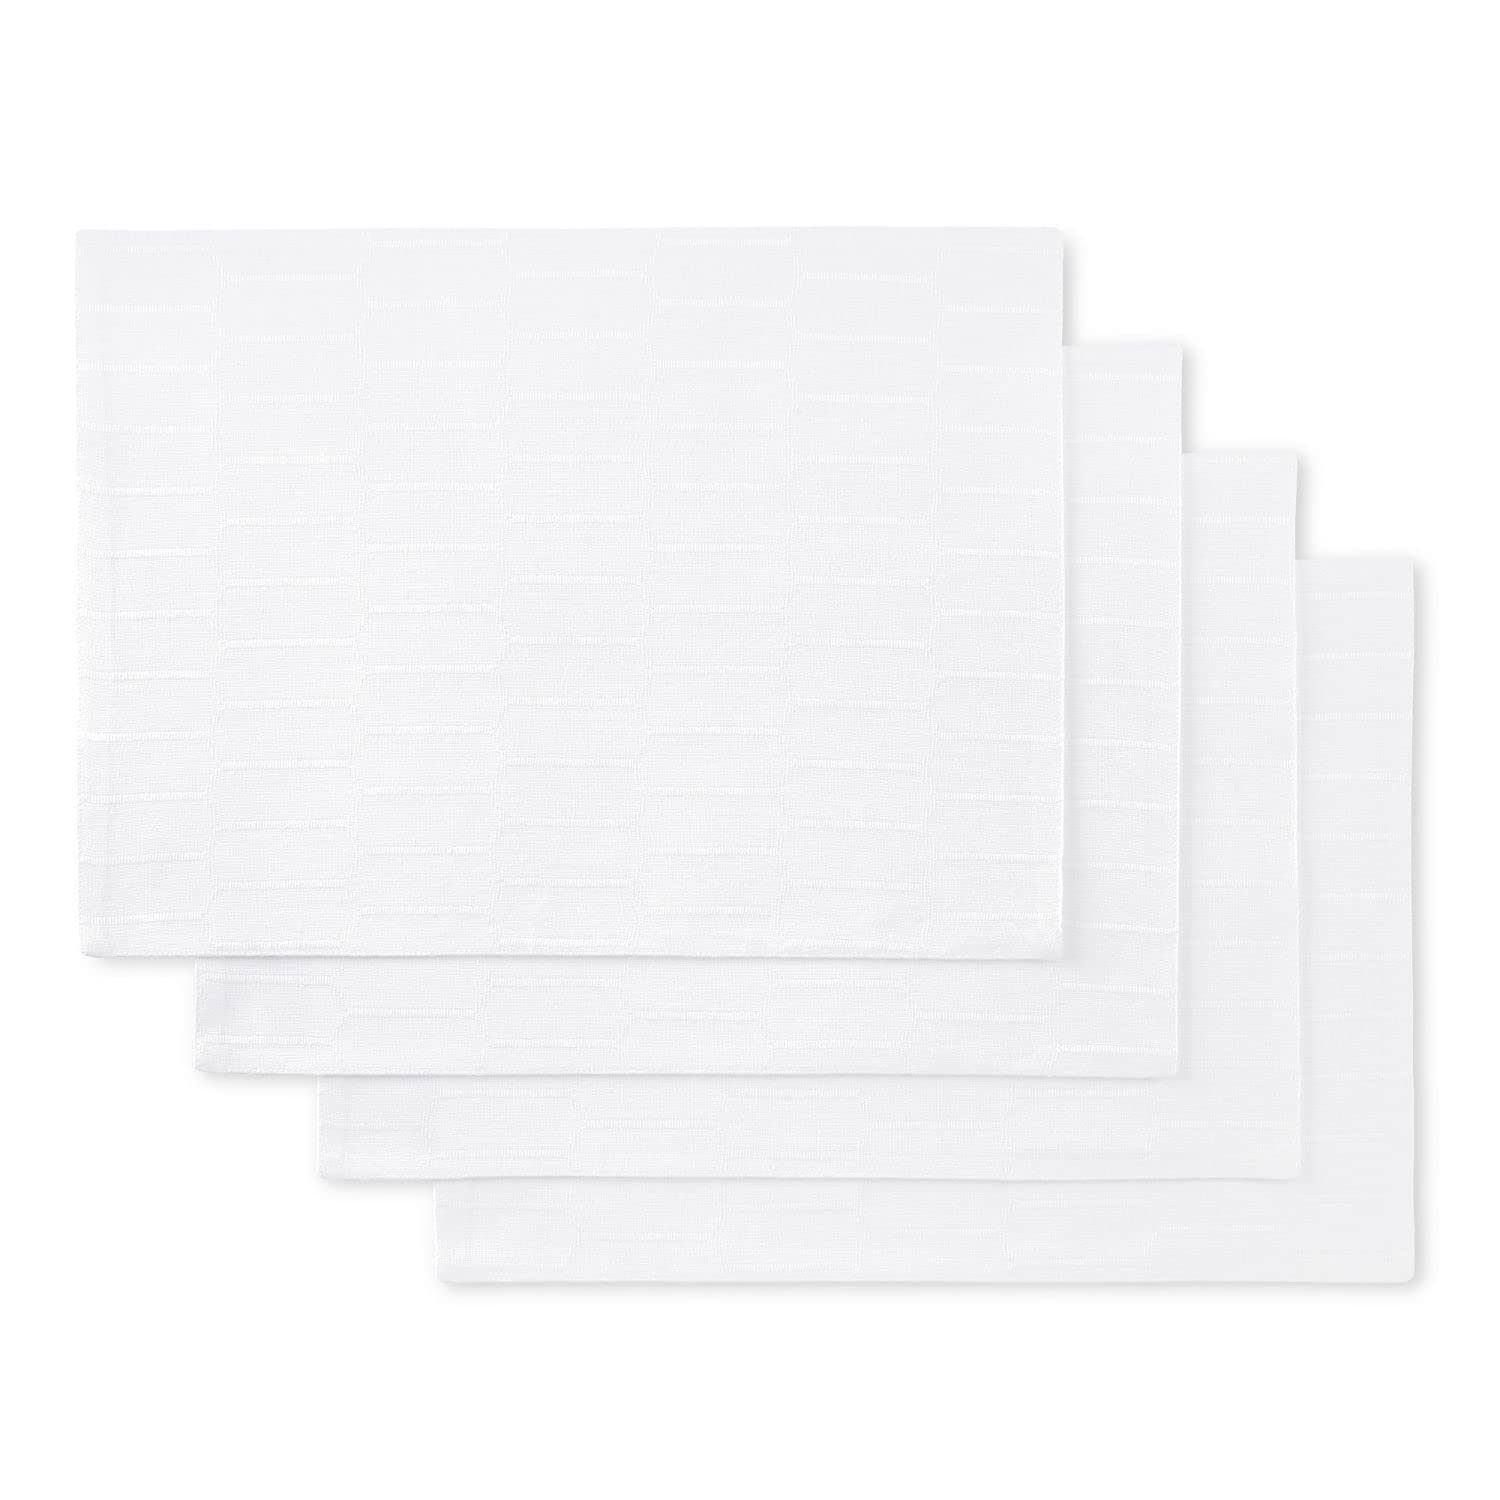 set of 4 Martha Stewart Honeycomb Modern Farmhouse Reversible Cloth Placemats (White) $11.00 + Free Shipping w/ Prime or on $35+